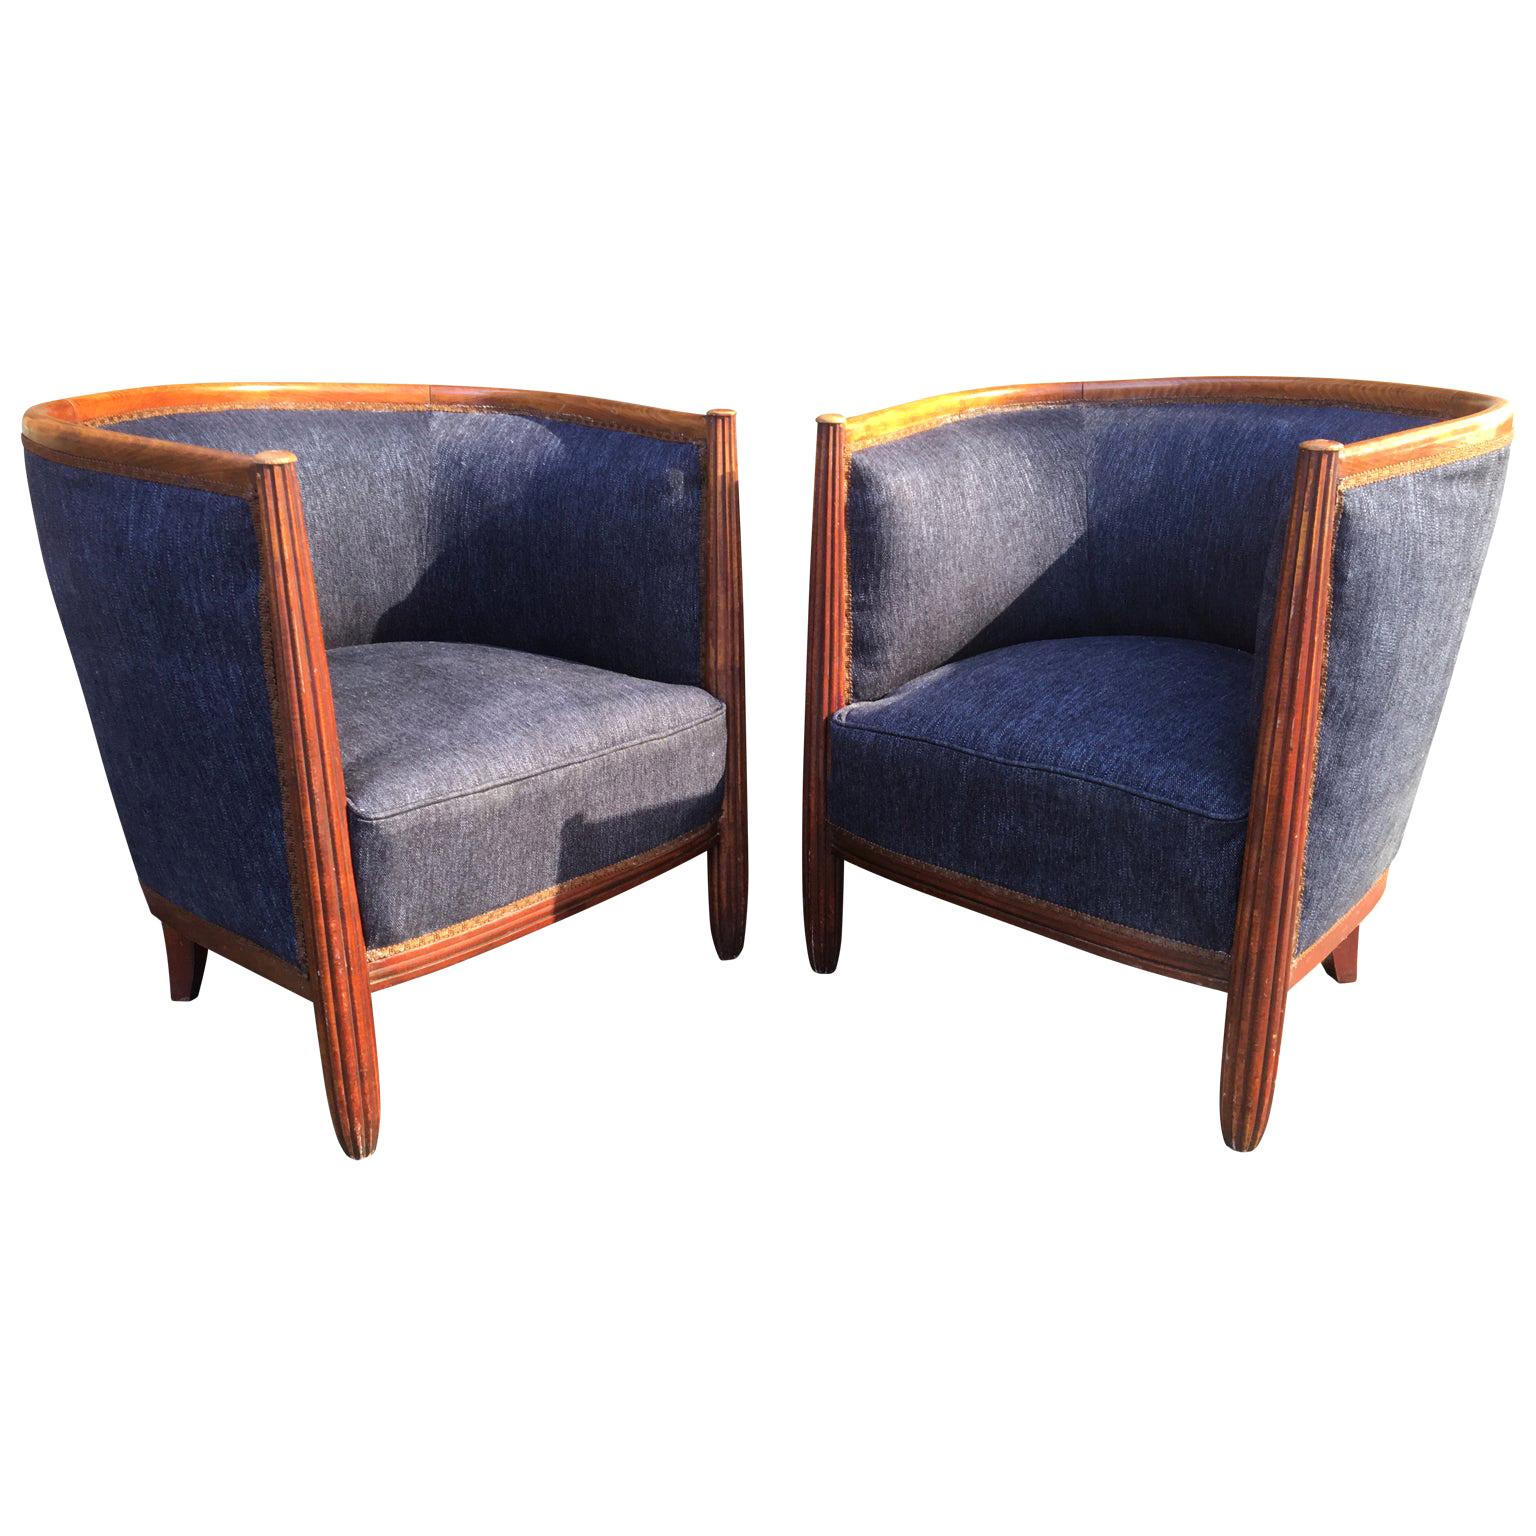 Pair of French Art Deco Barrel Club Chairs.